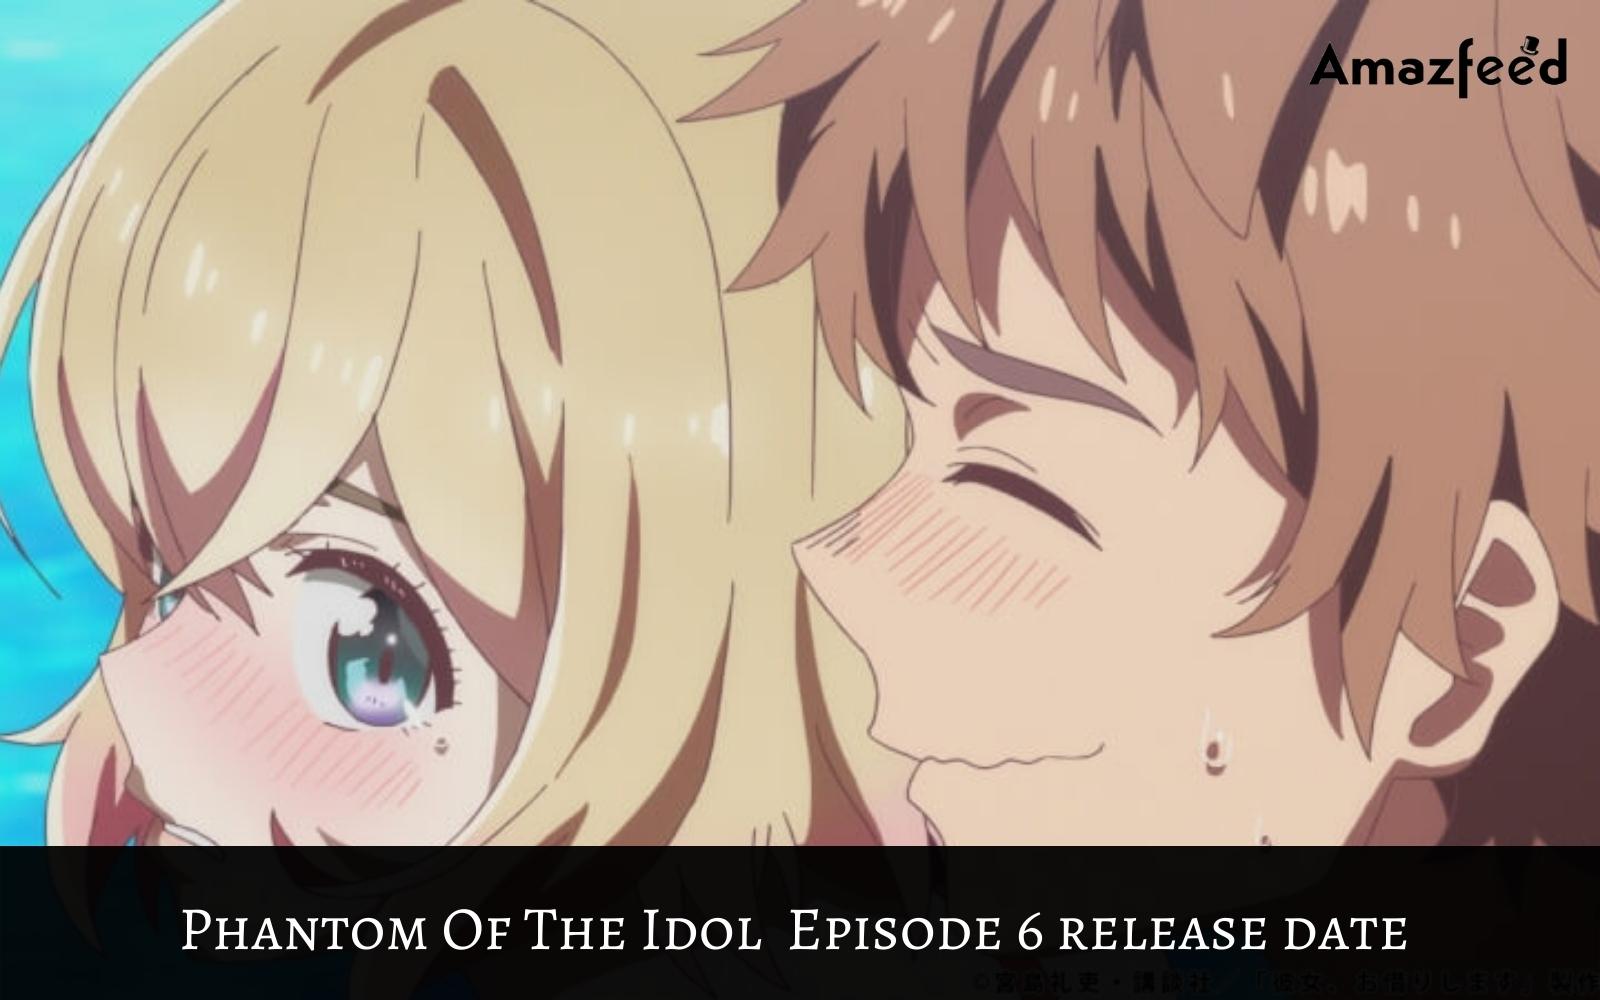 Phantom Of The Idol Episode 6 : Countdown, Release Date, Spoiler, Recap, Cast & Where to Watch